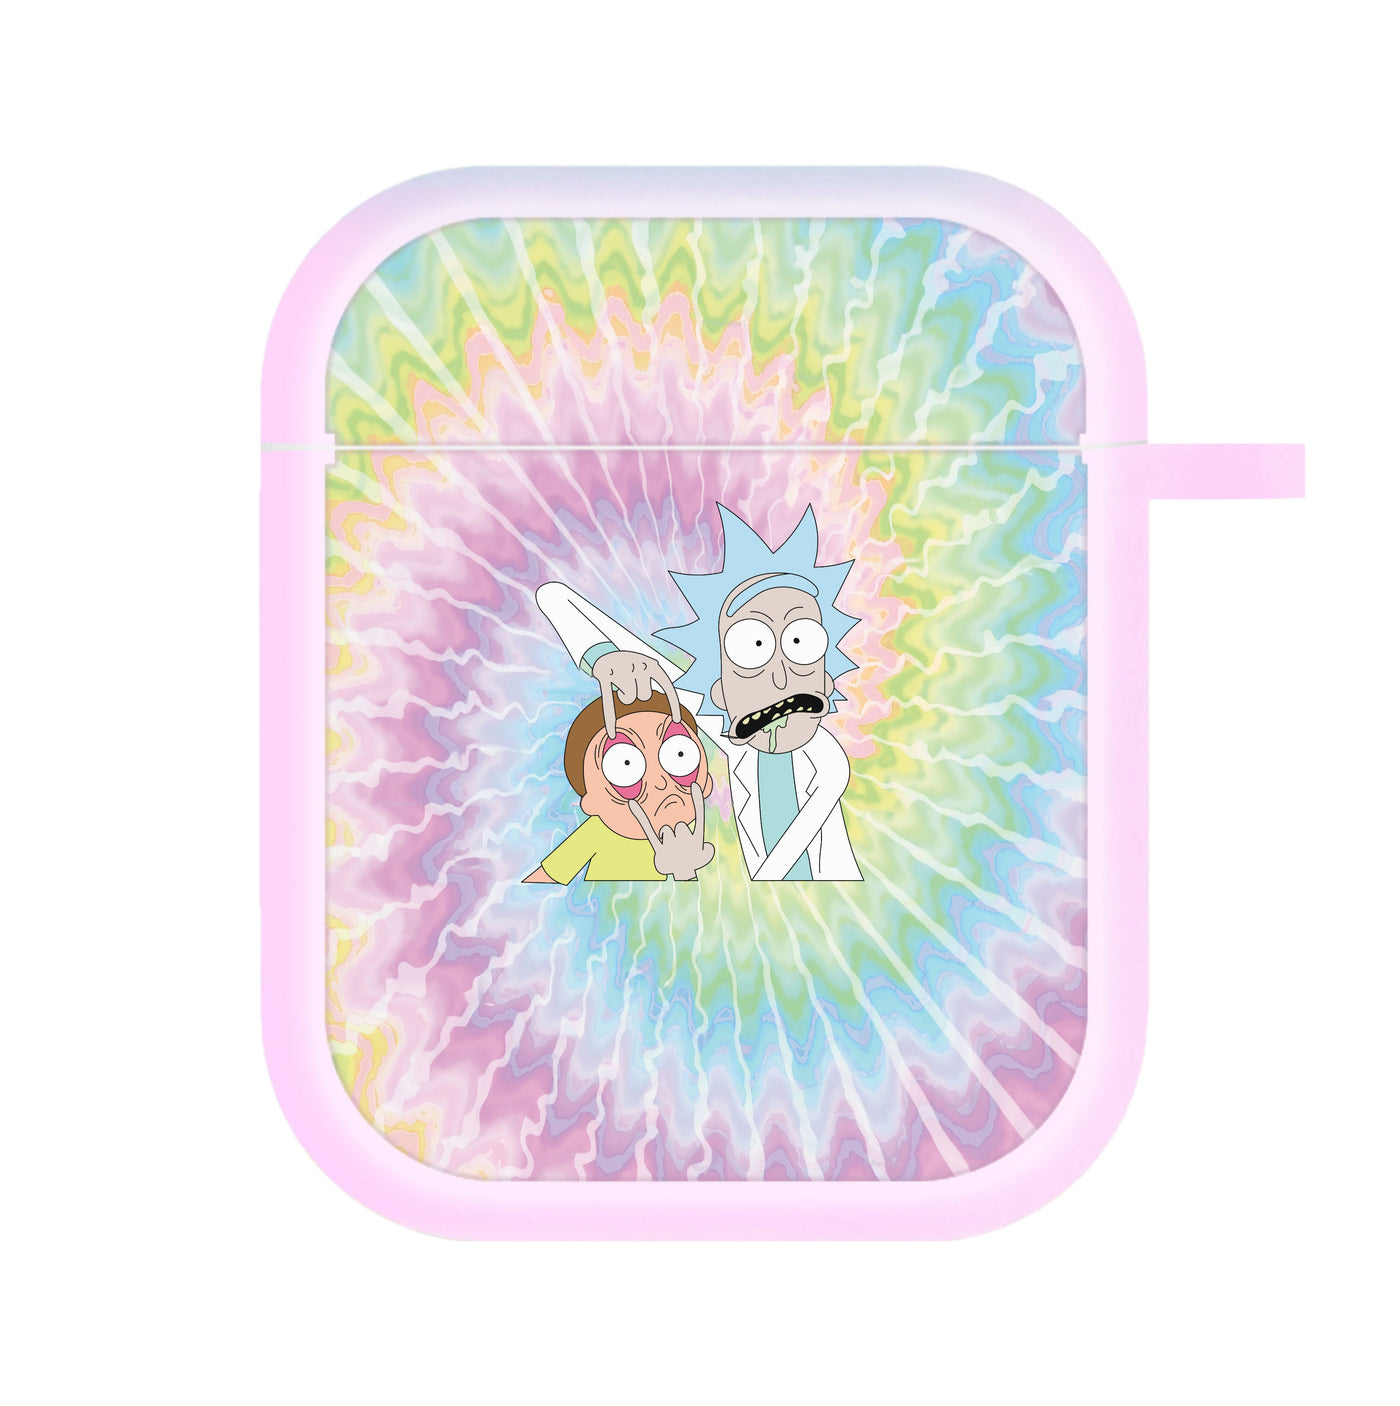 Psychedelic - Rick And Morty AirPods Case